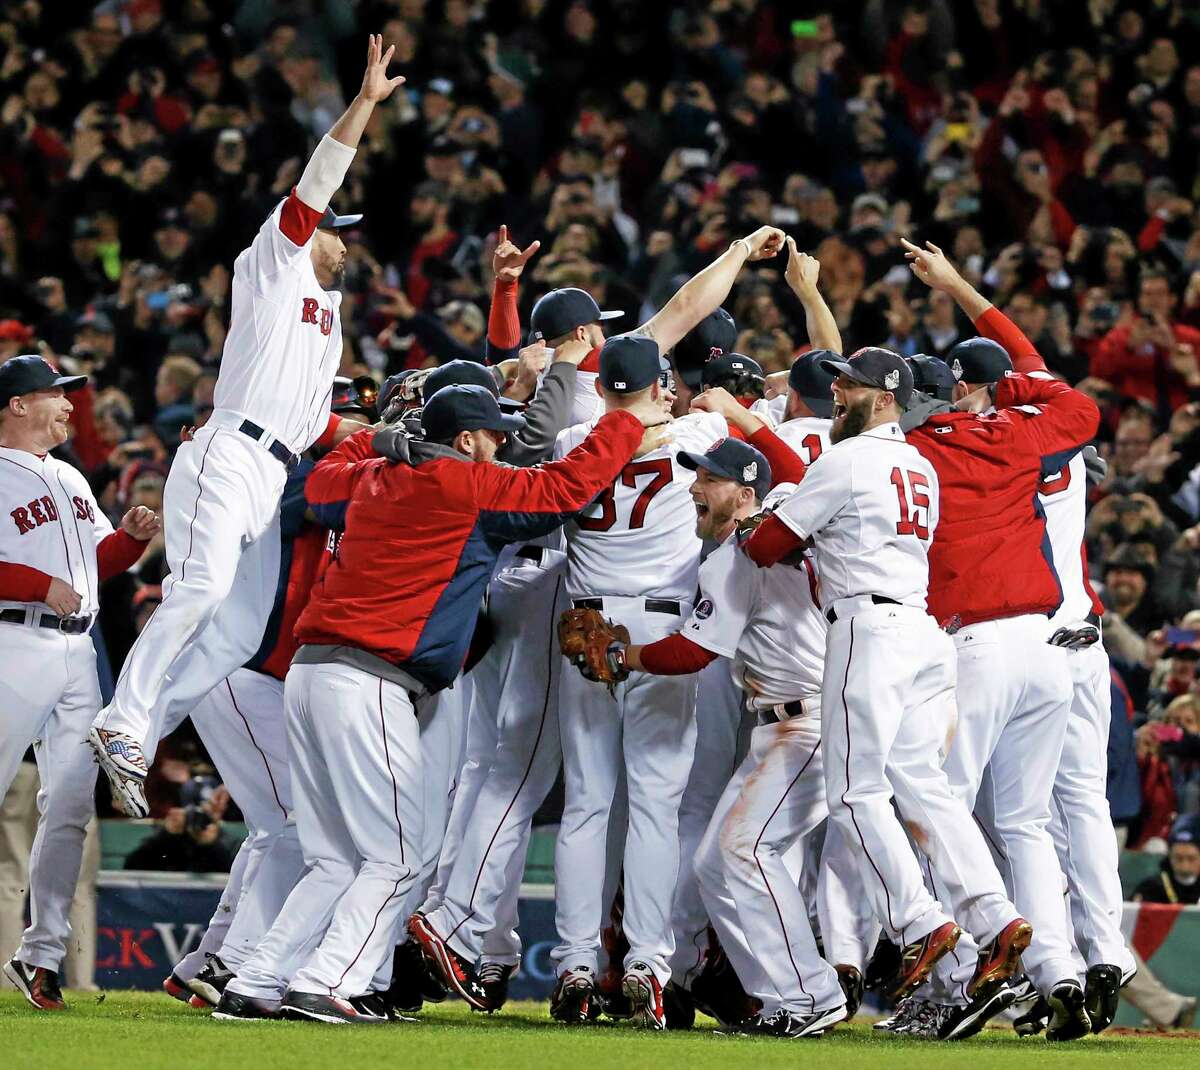 Red Sox win World Series at Fenway for first time since 1918